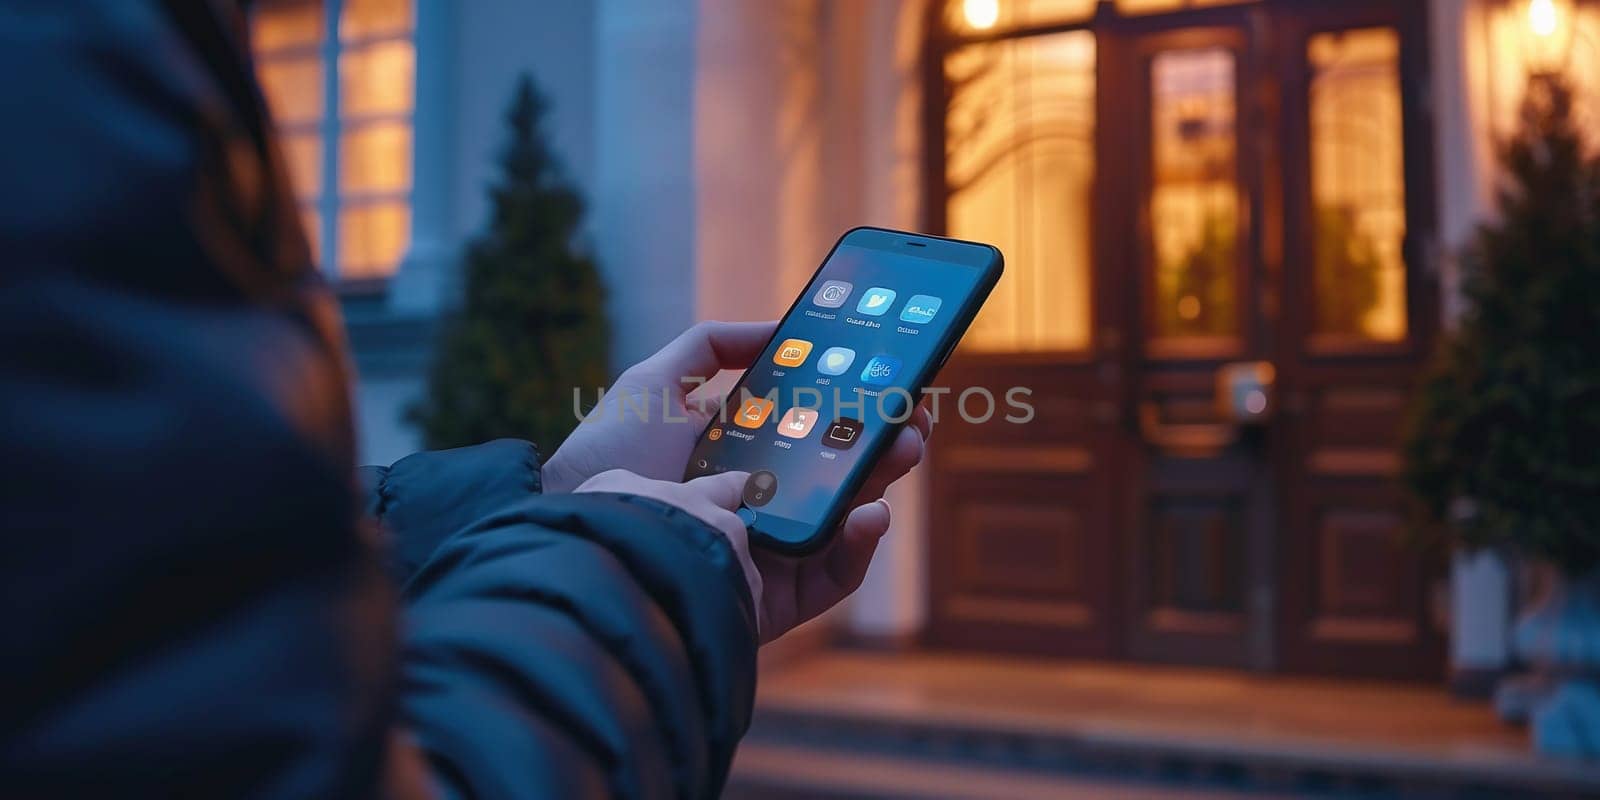 smart house, home automation, device with app icons. Man uses his smartphone with smarthome security app to unlock the door of his house. High quality photo